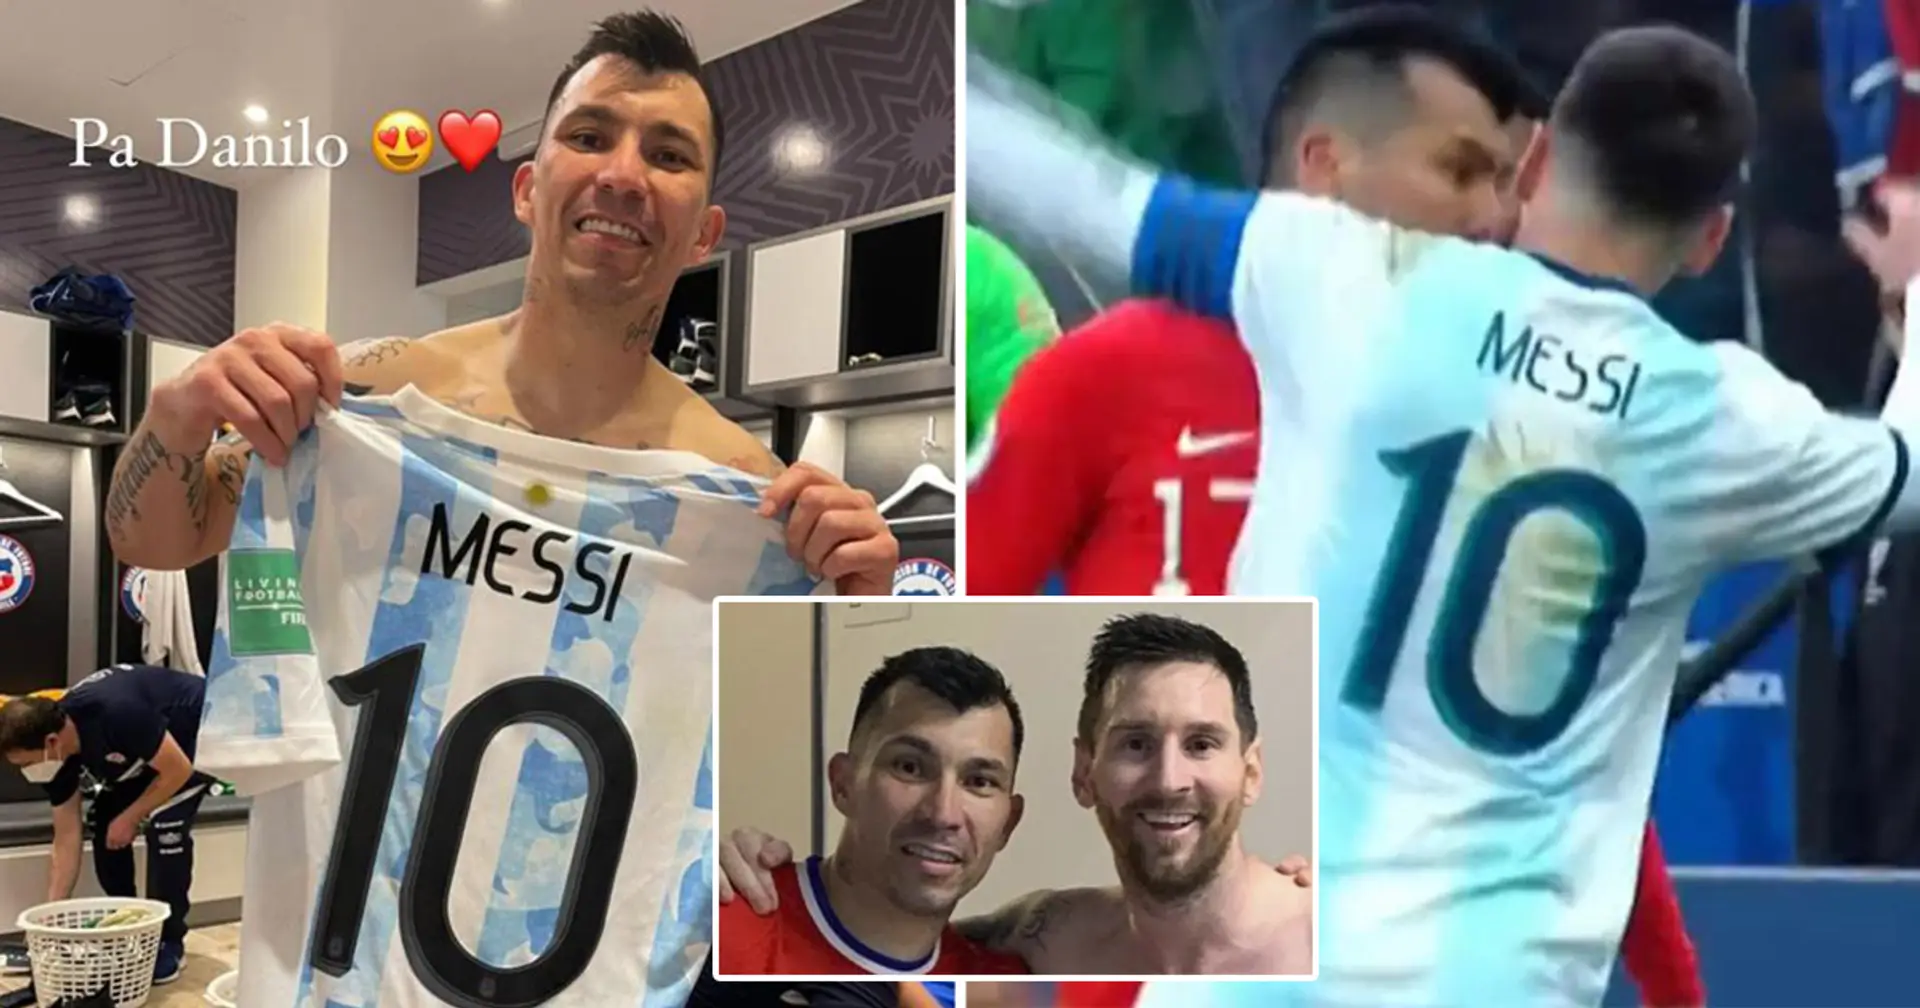 Messi gifts jersey to Chile 'pitbull' Gary Medel – the two heavily clashed with each other in 2019